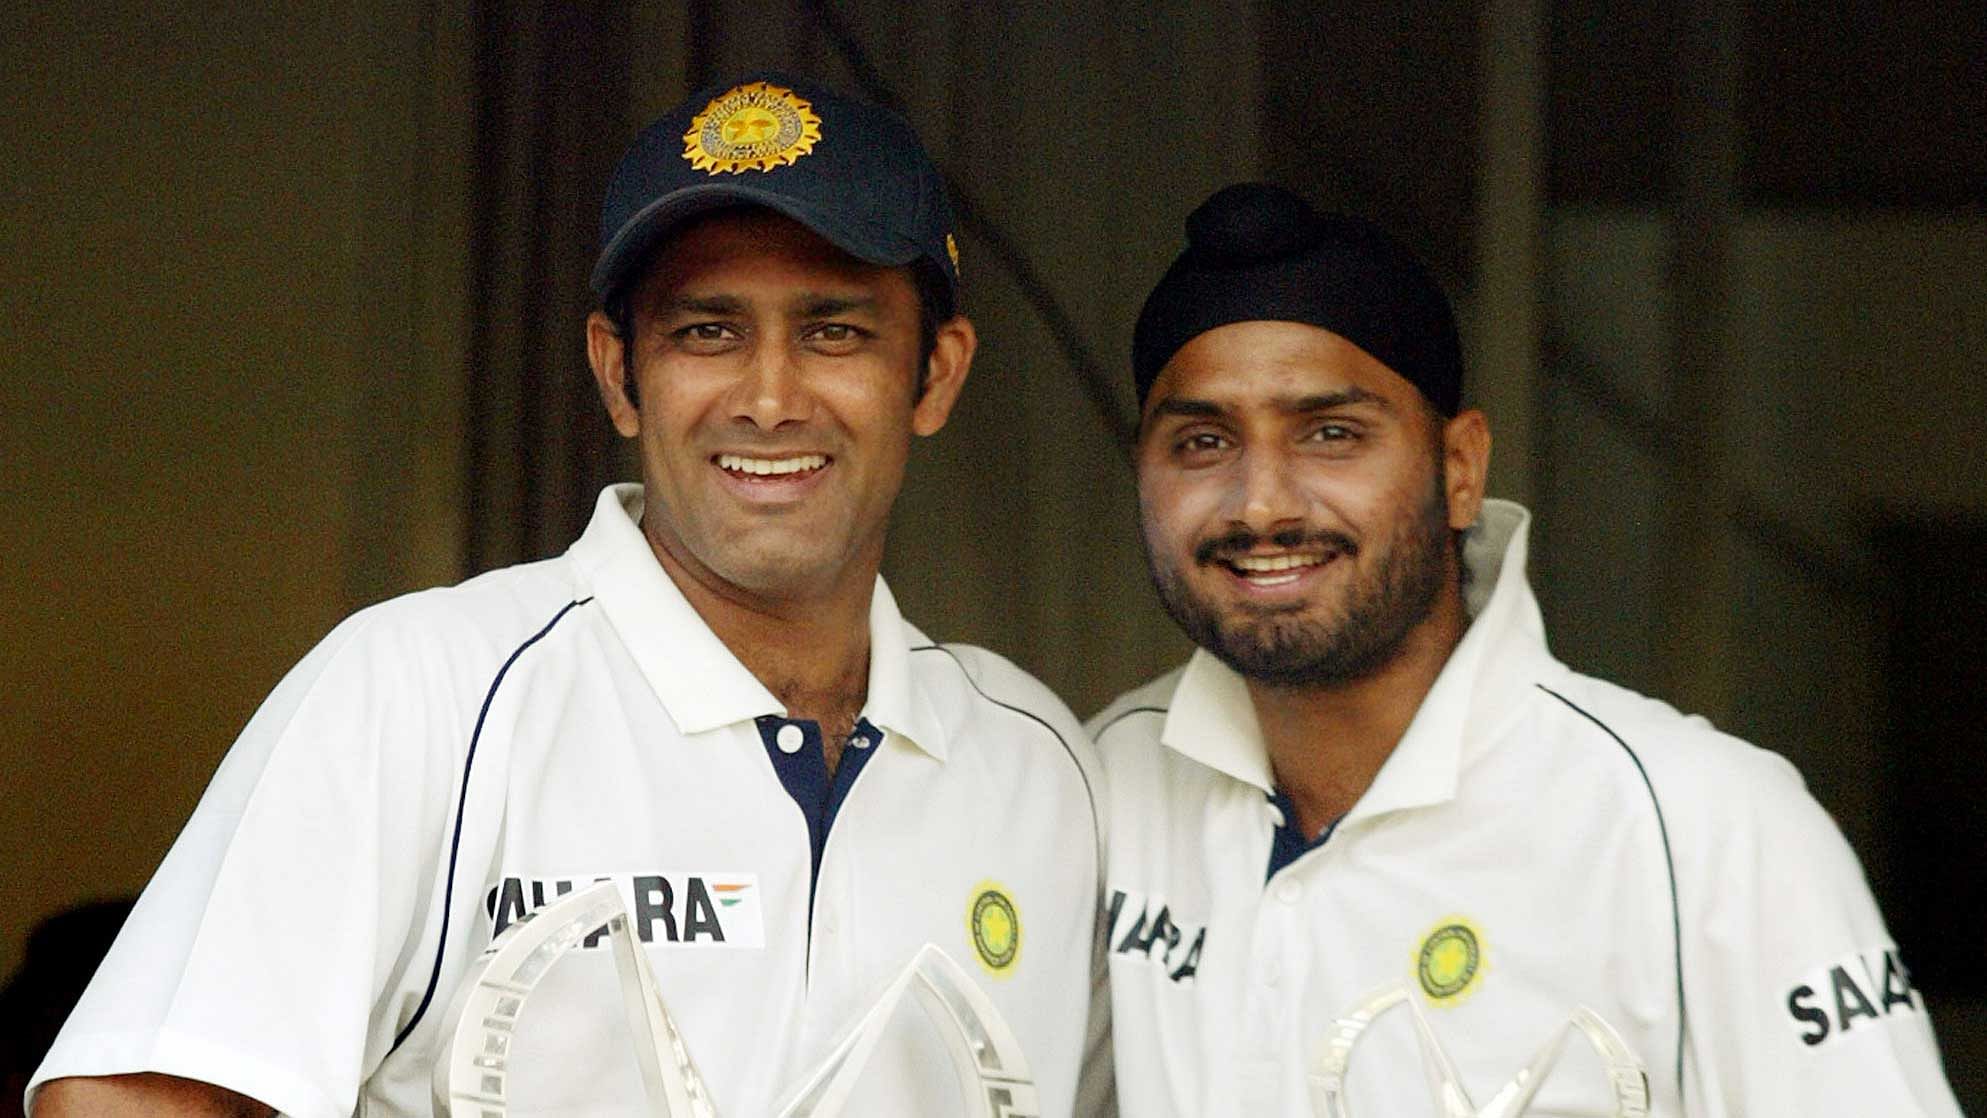 Harbhajan and Anil Kumble during India’s Test series against Sri Lanka in December 2005. (Photo: Reuters)